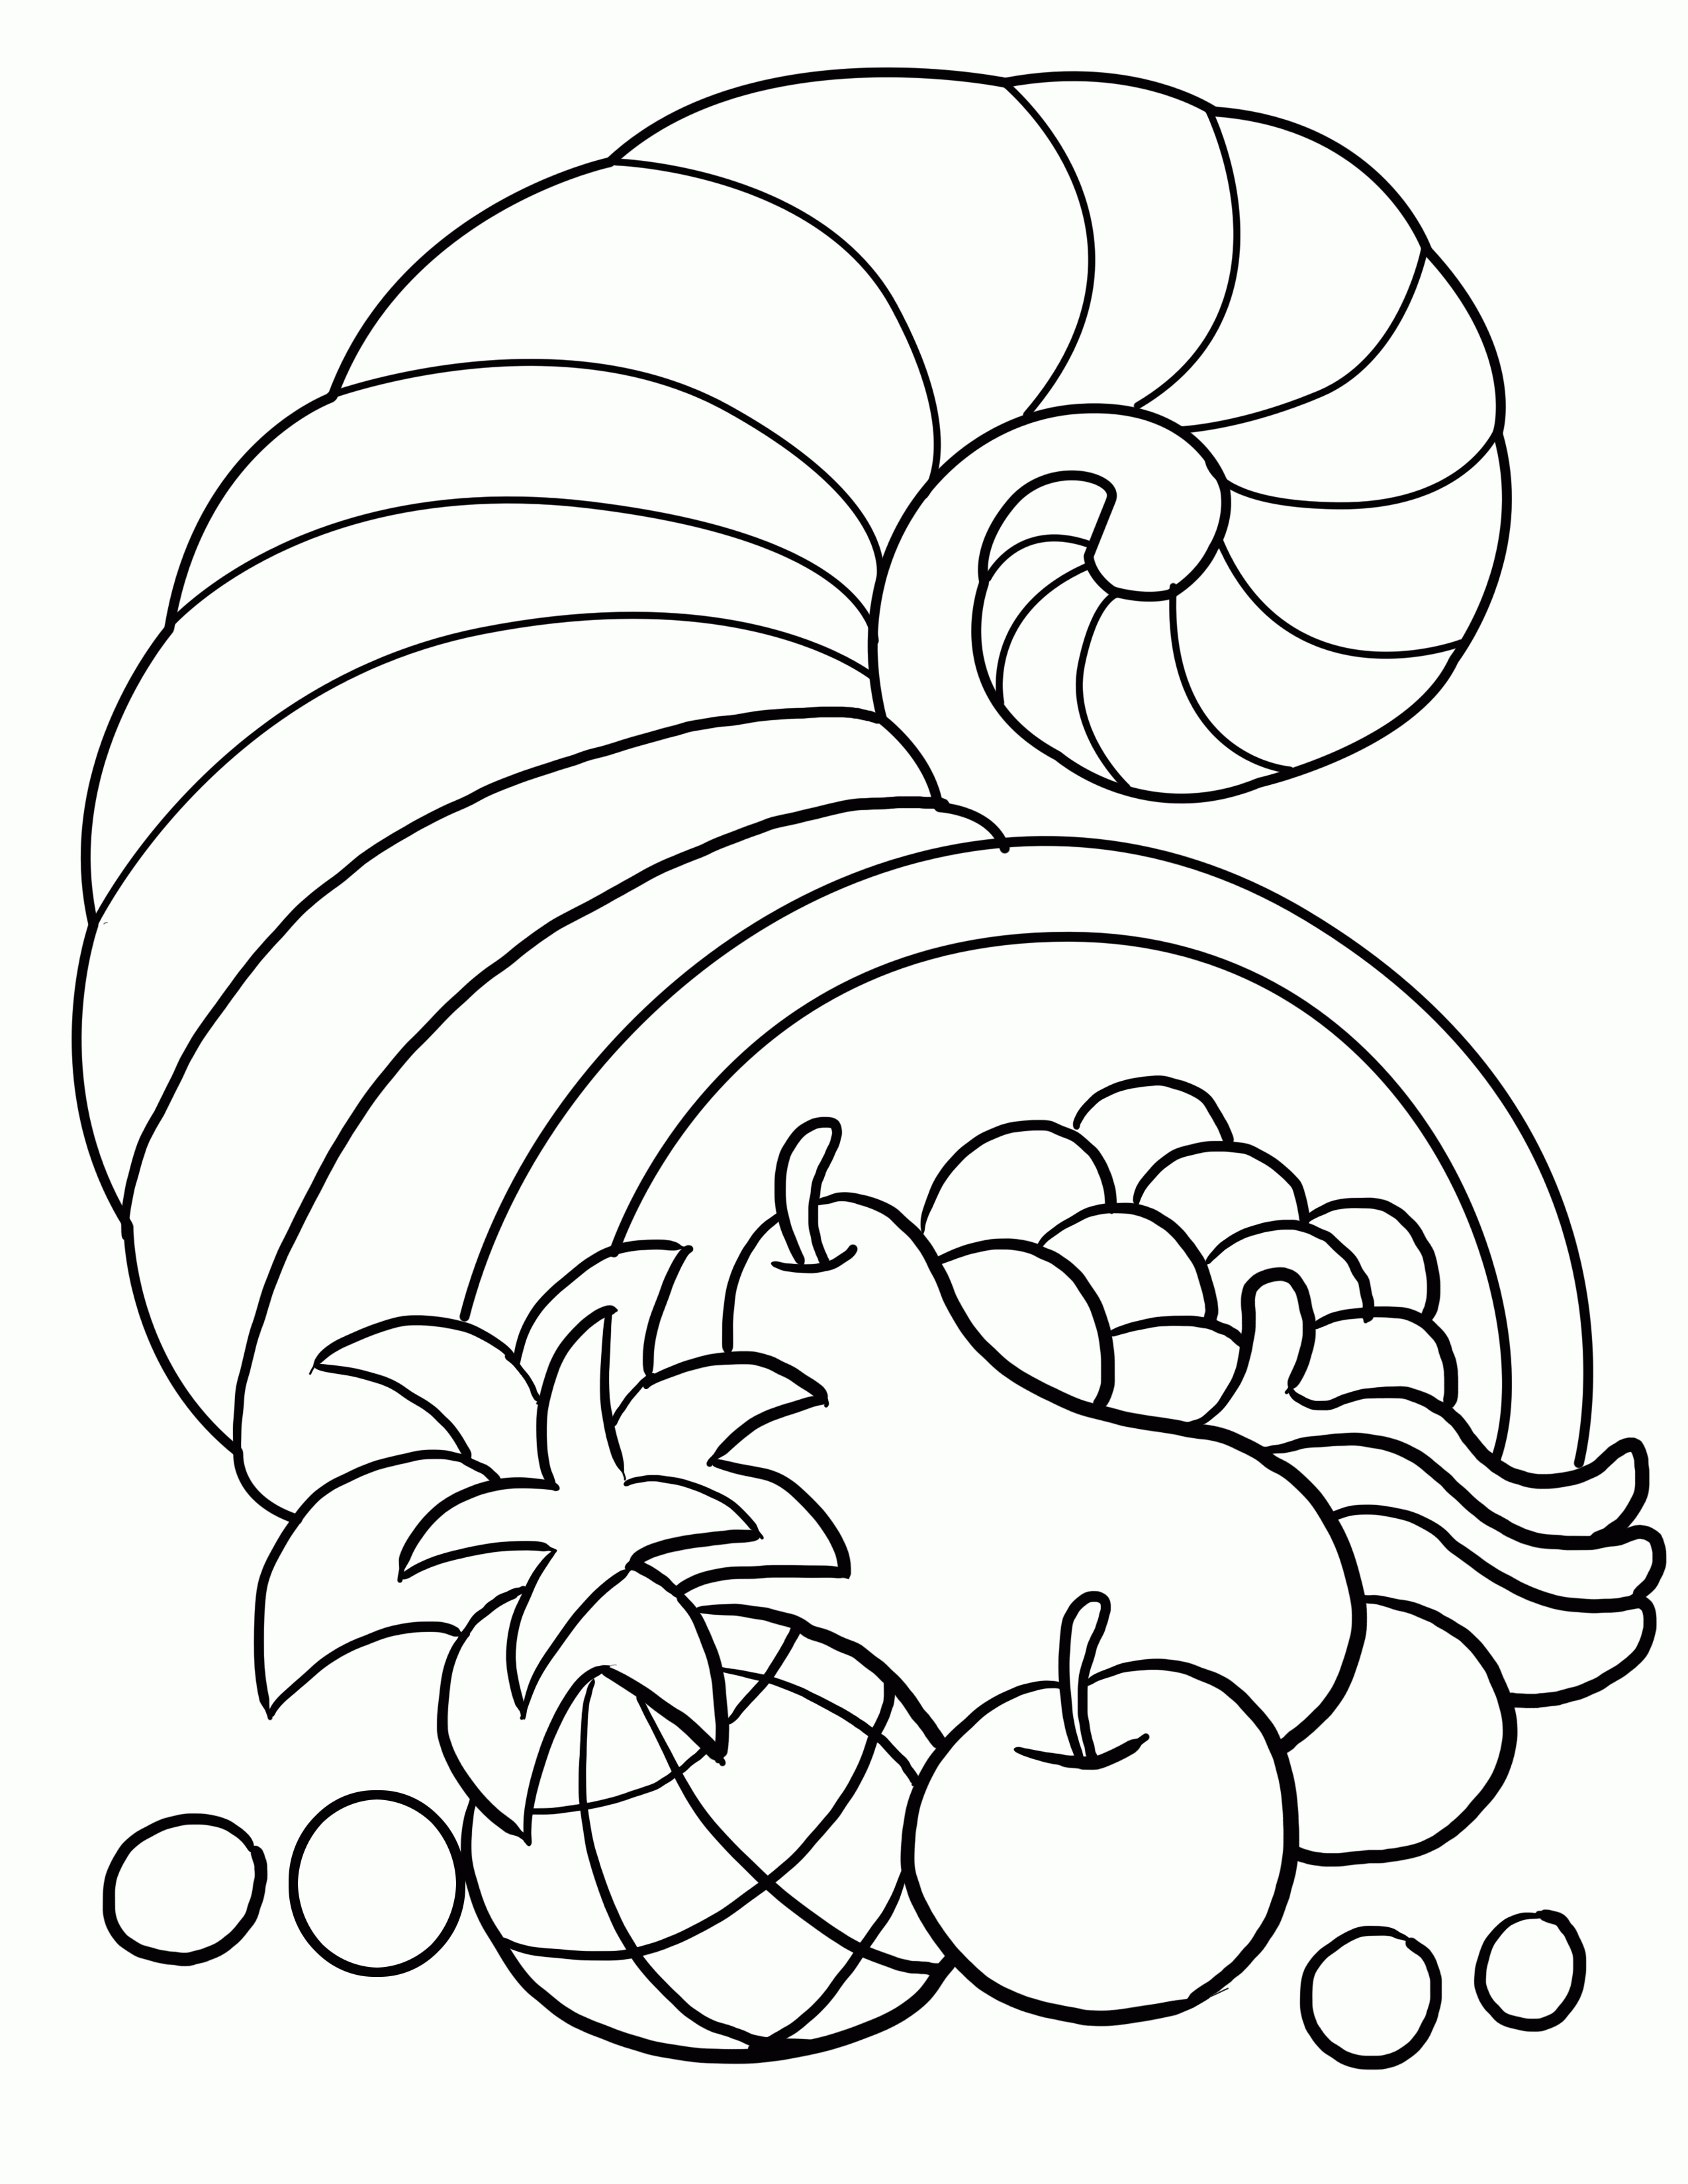 Thanksgiving Harvest Coloring Pages   Coloring Home